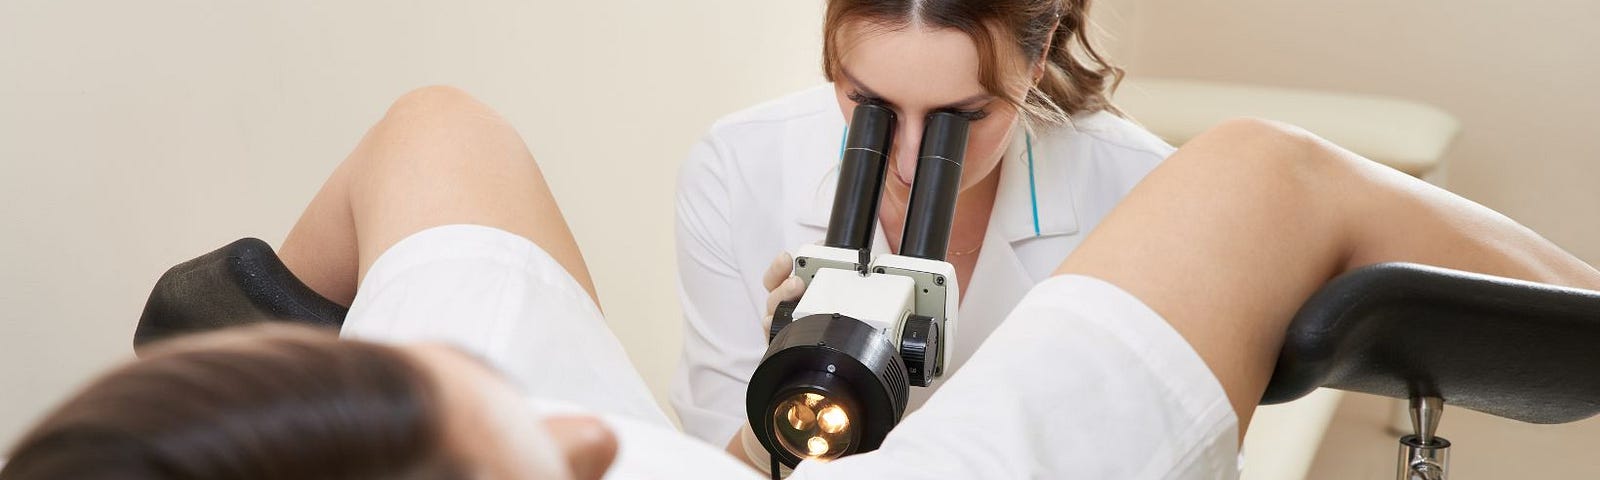 a female doctor examines a patients vagina